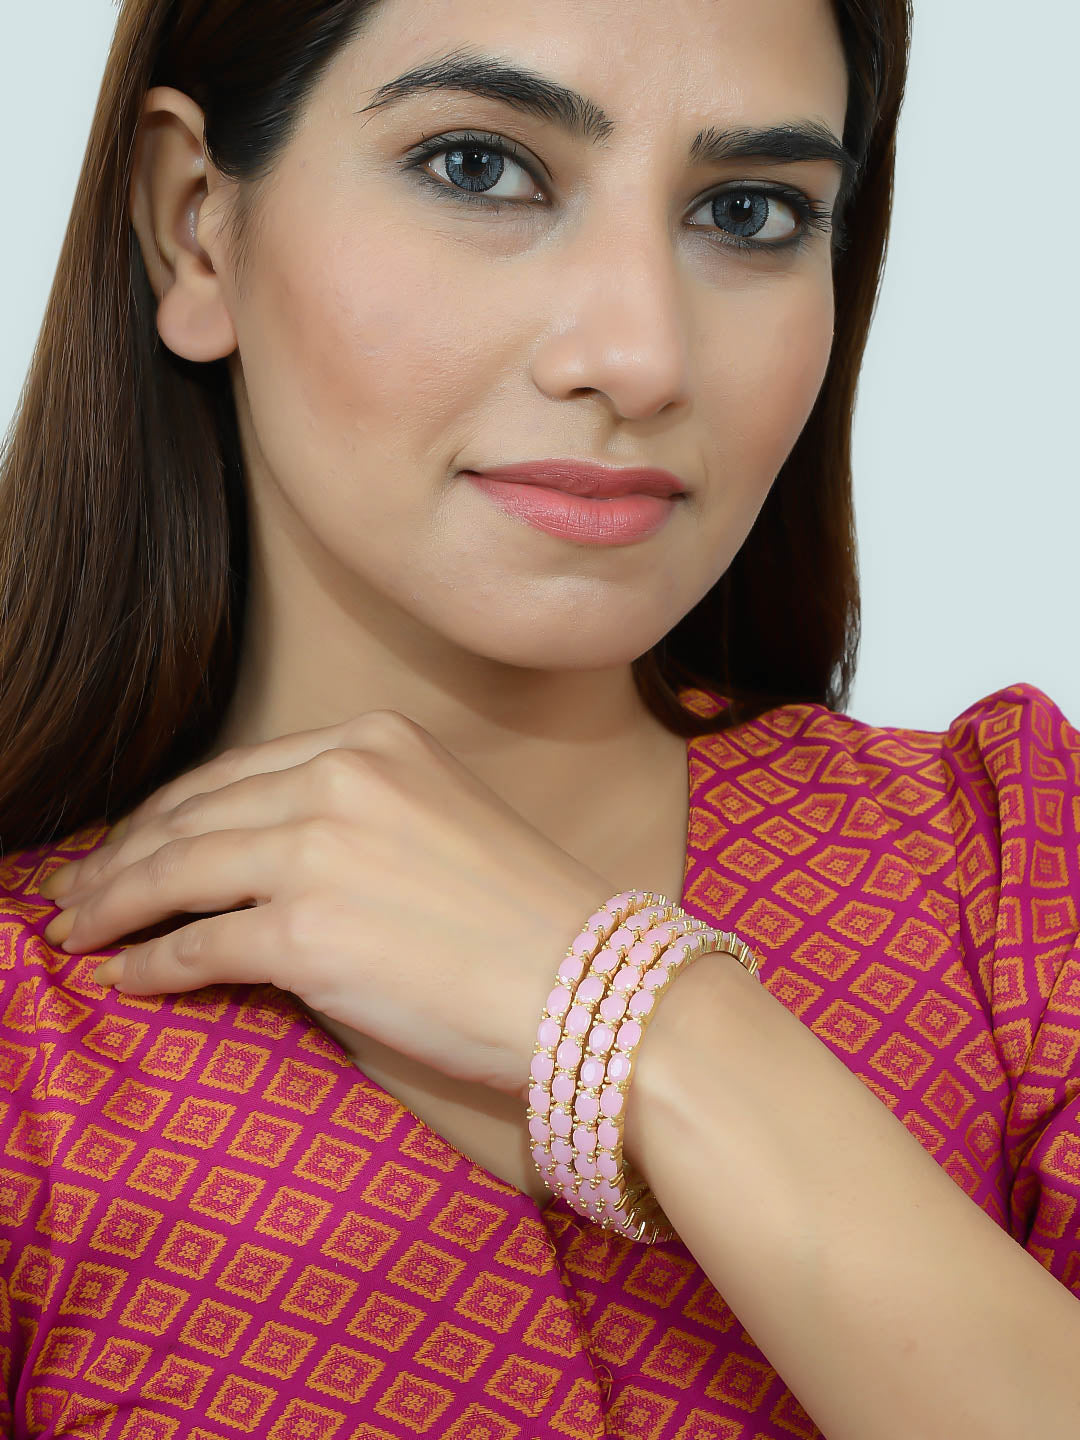 Set Of Four Gold Plated Pink American Diamond Studded Handmade Ethnic Bangle For Women